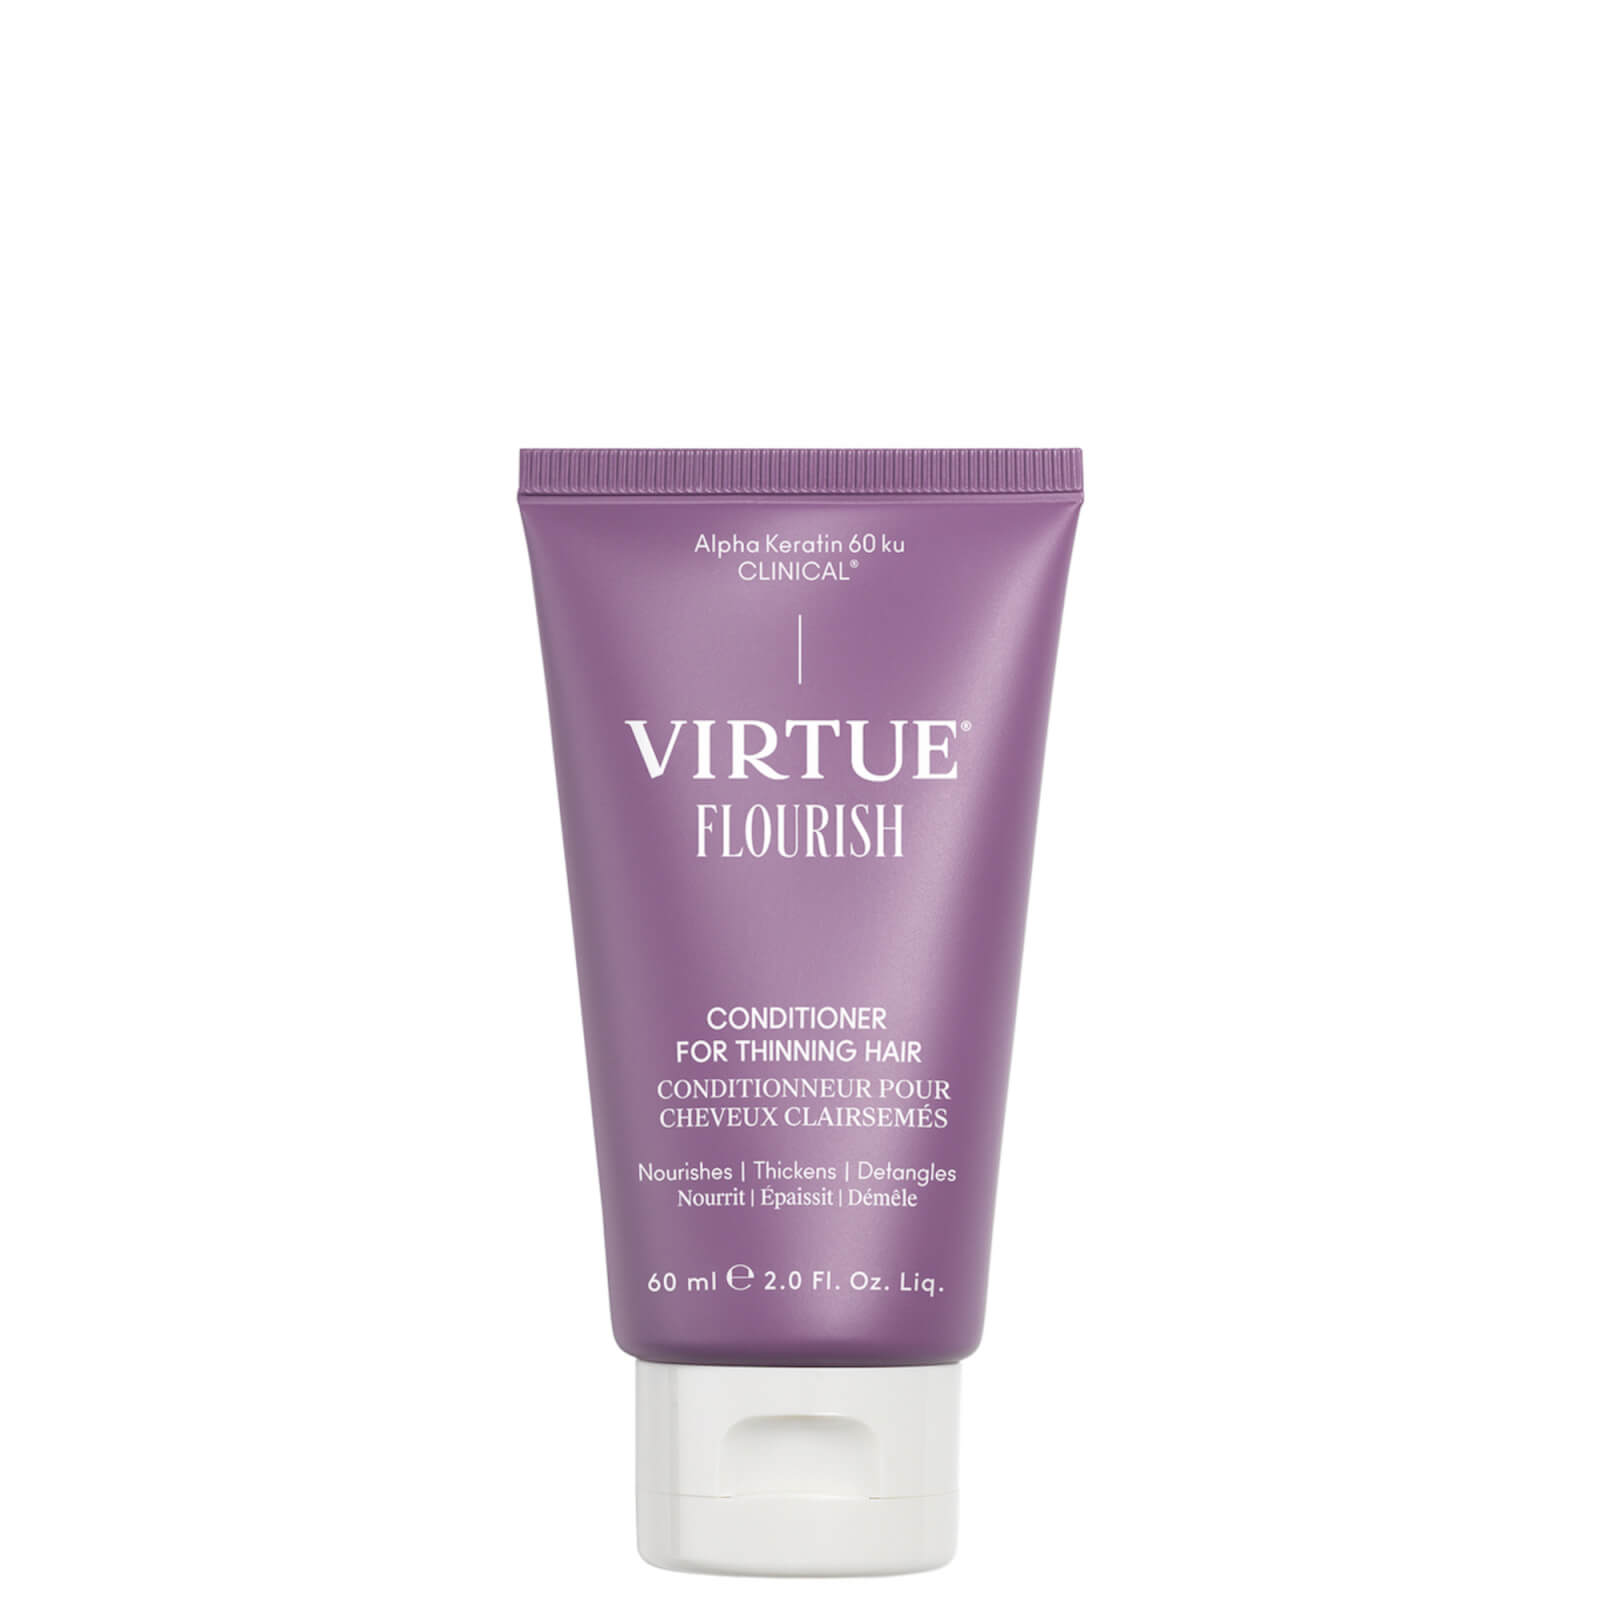 VIRTUE Flourish Conditioner for Thinning Hair 60ml product